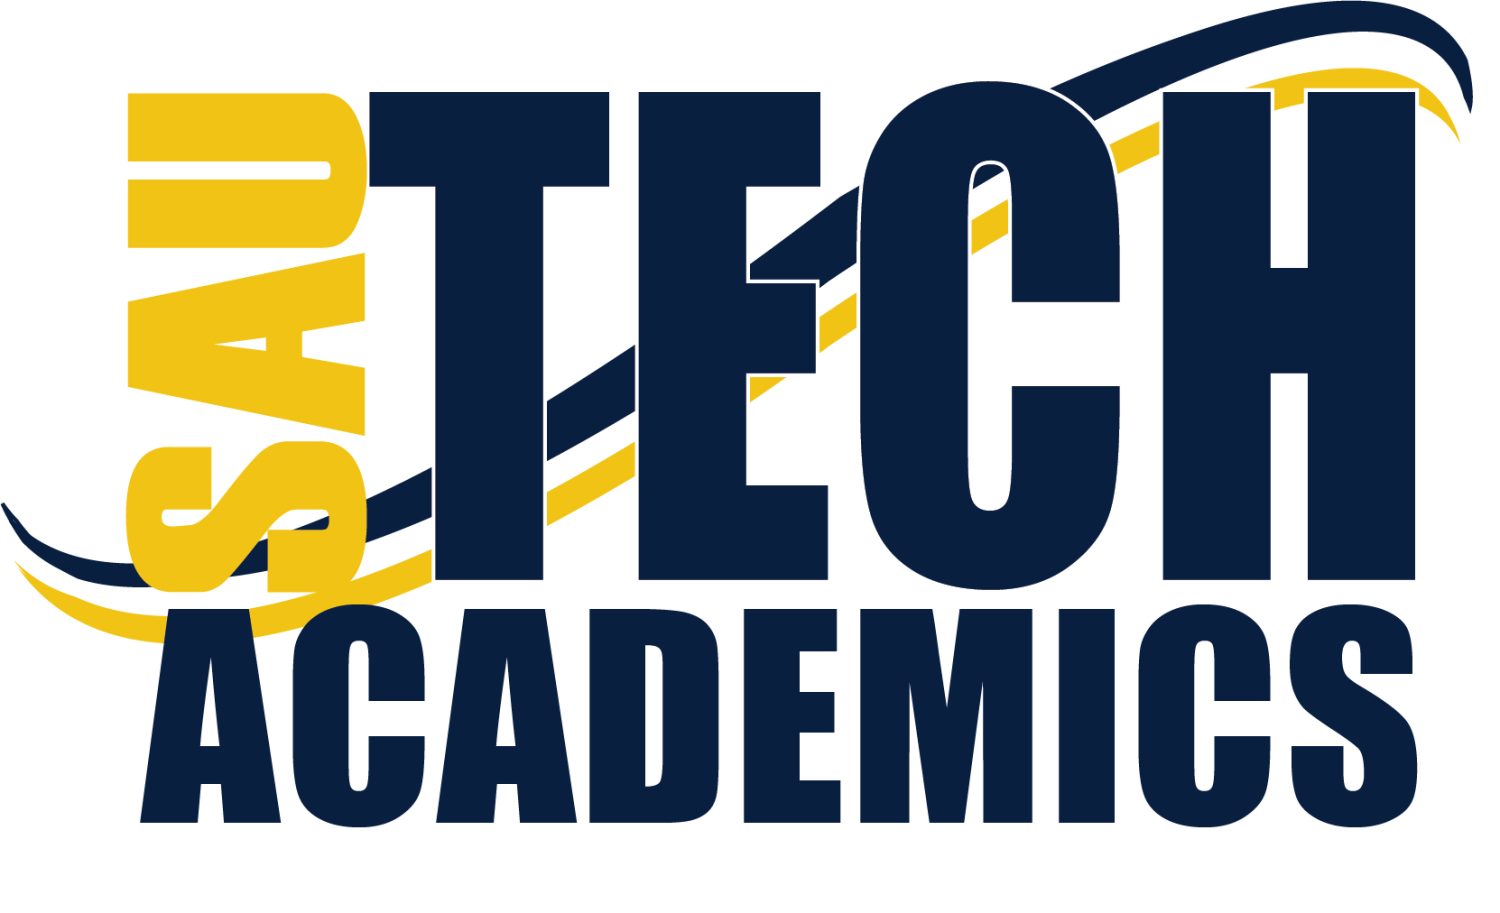 blue and yellow logo for academics